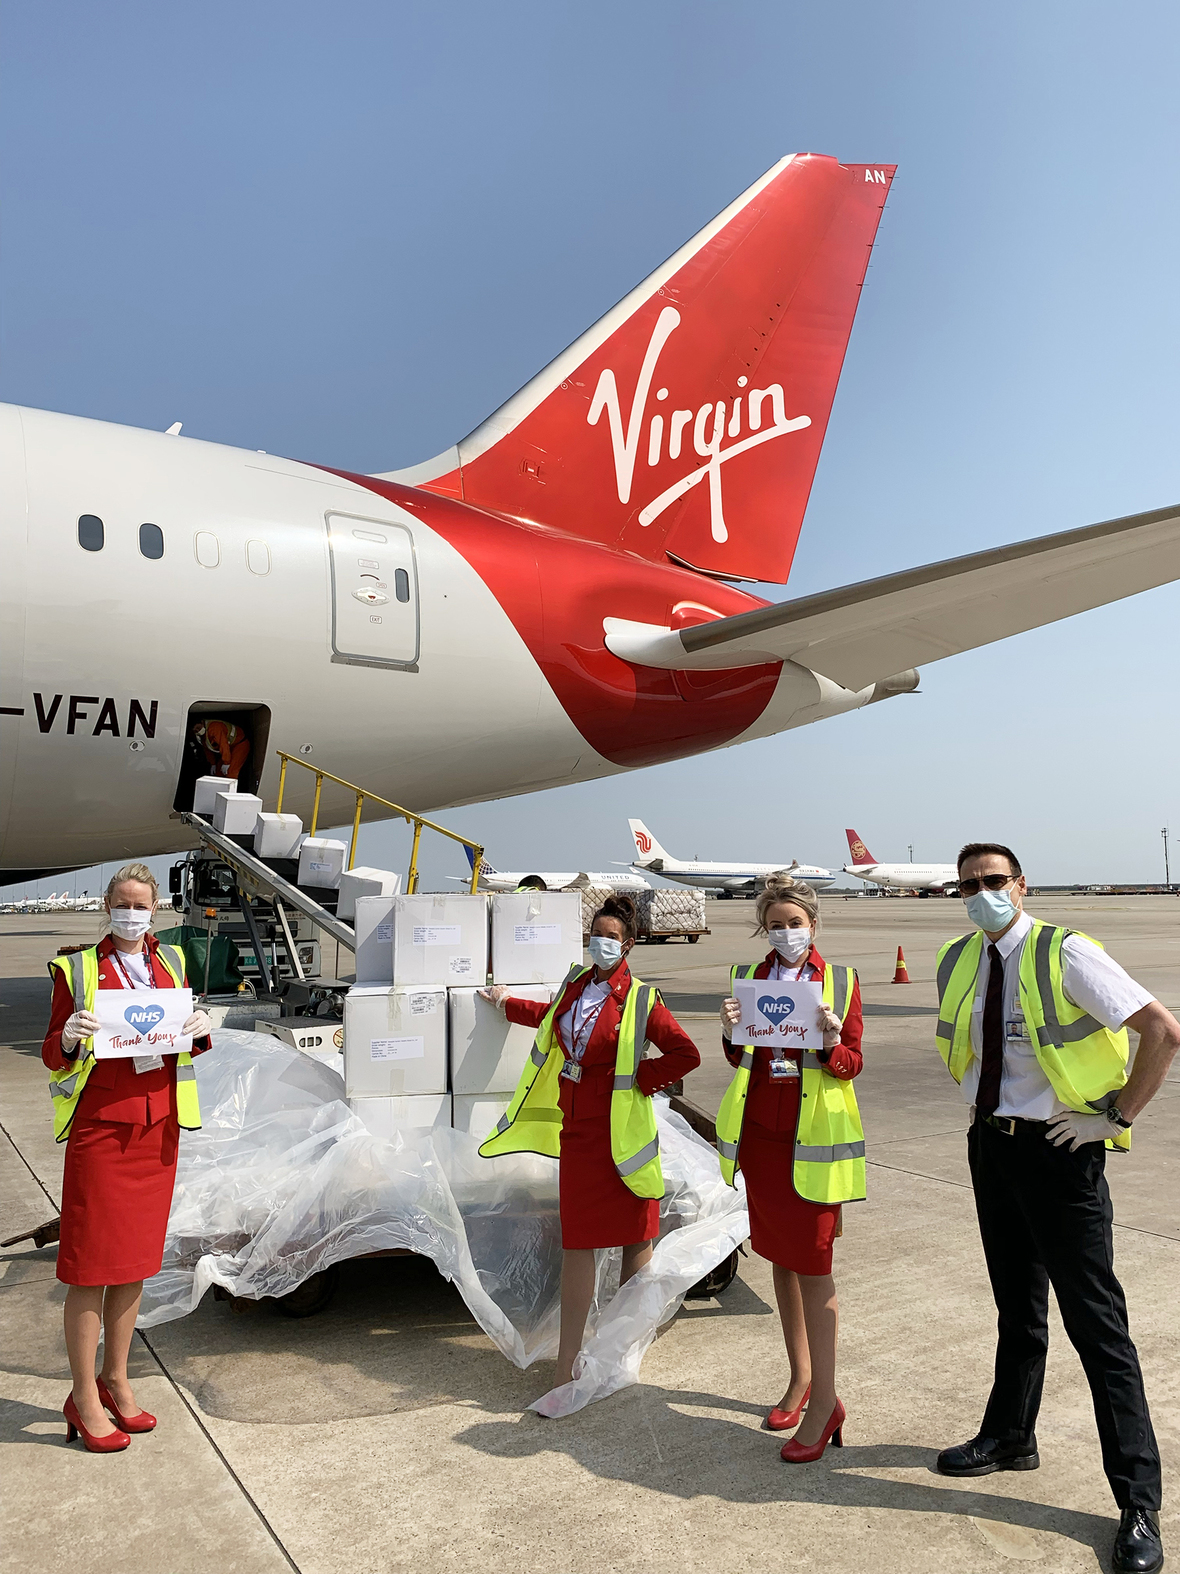 Virgin Atlantic is keeping global supply chains running and transporting essential supplies around the world